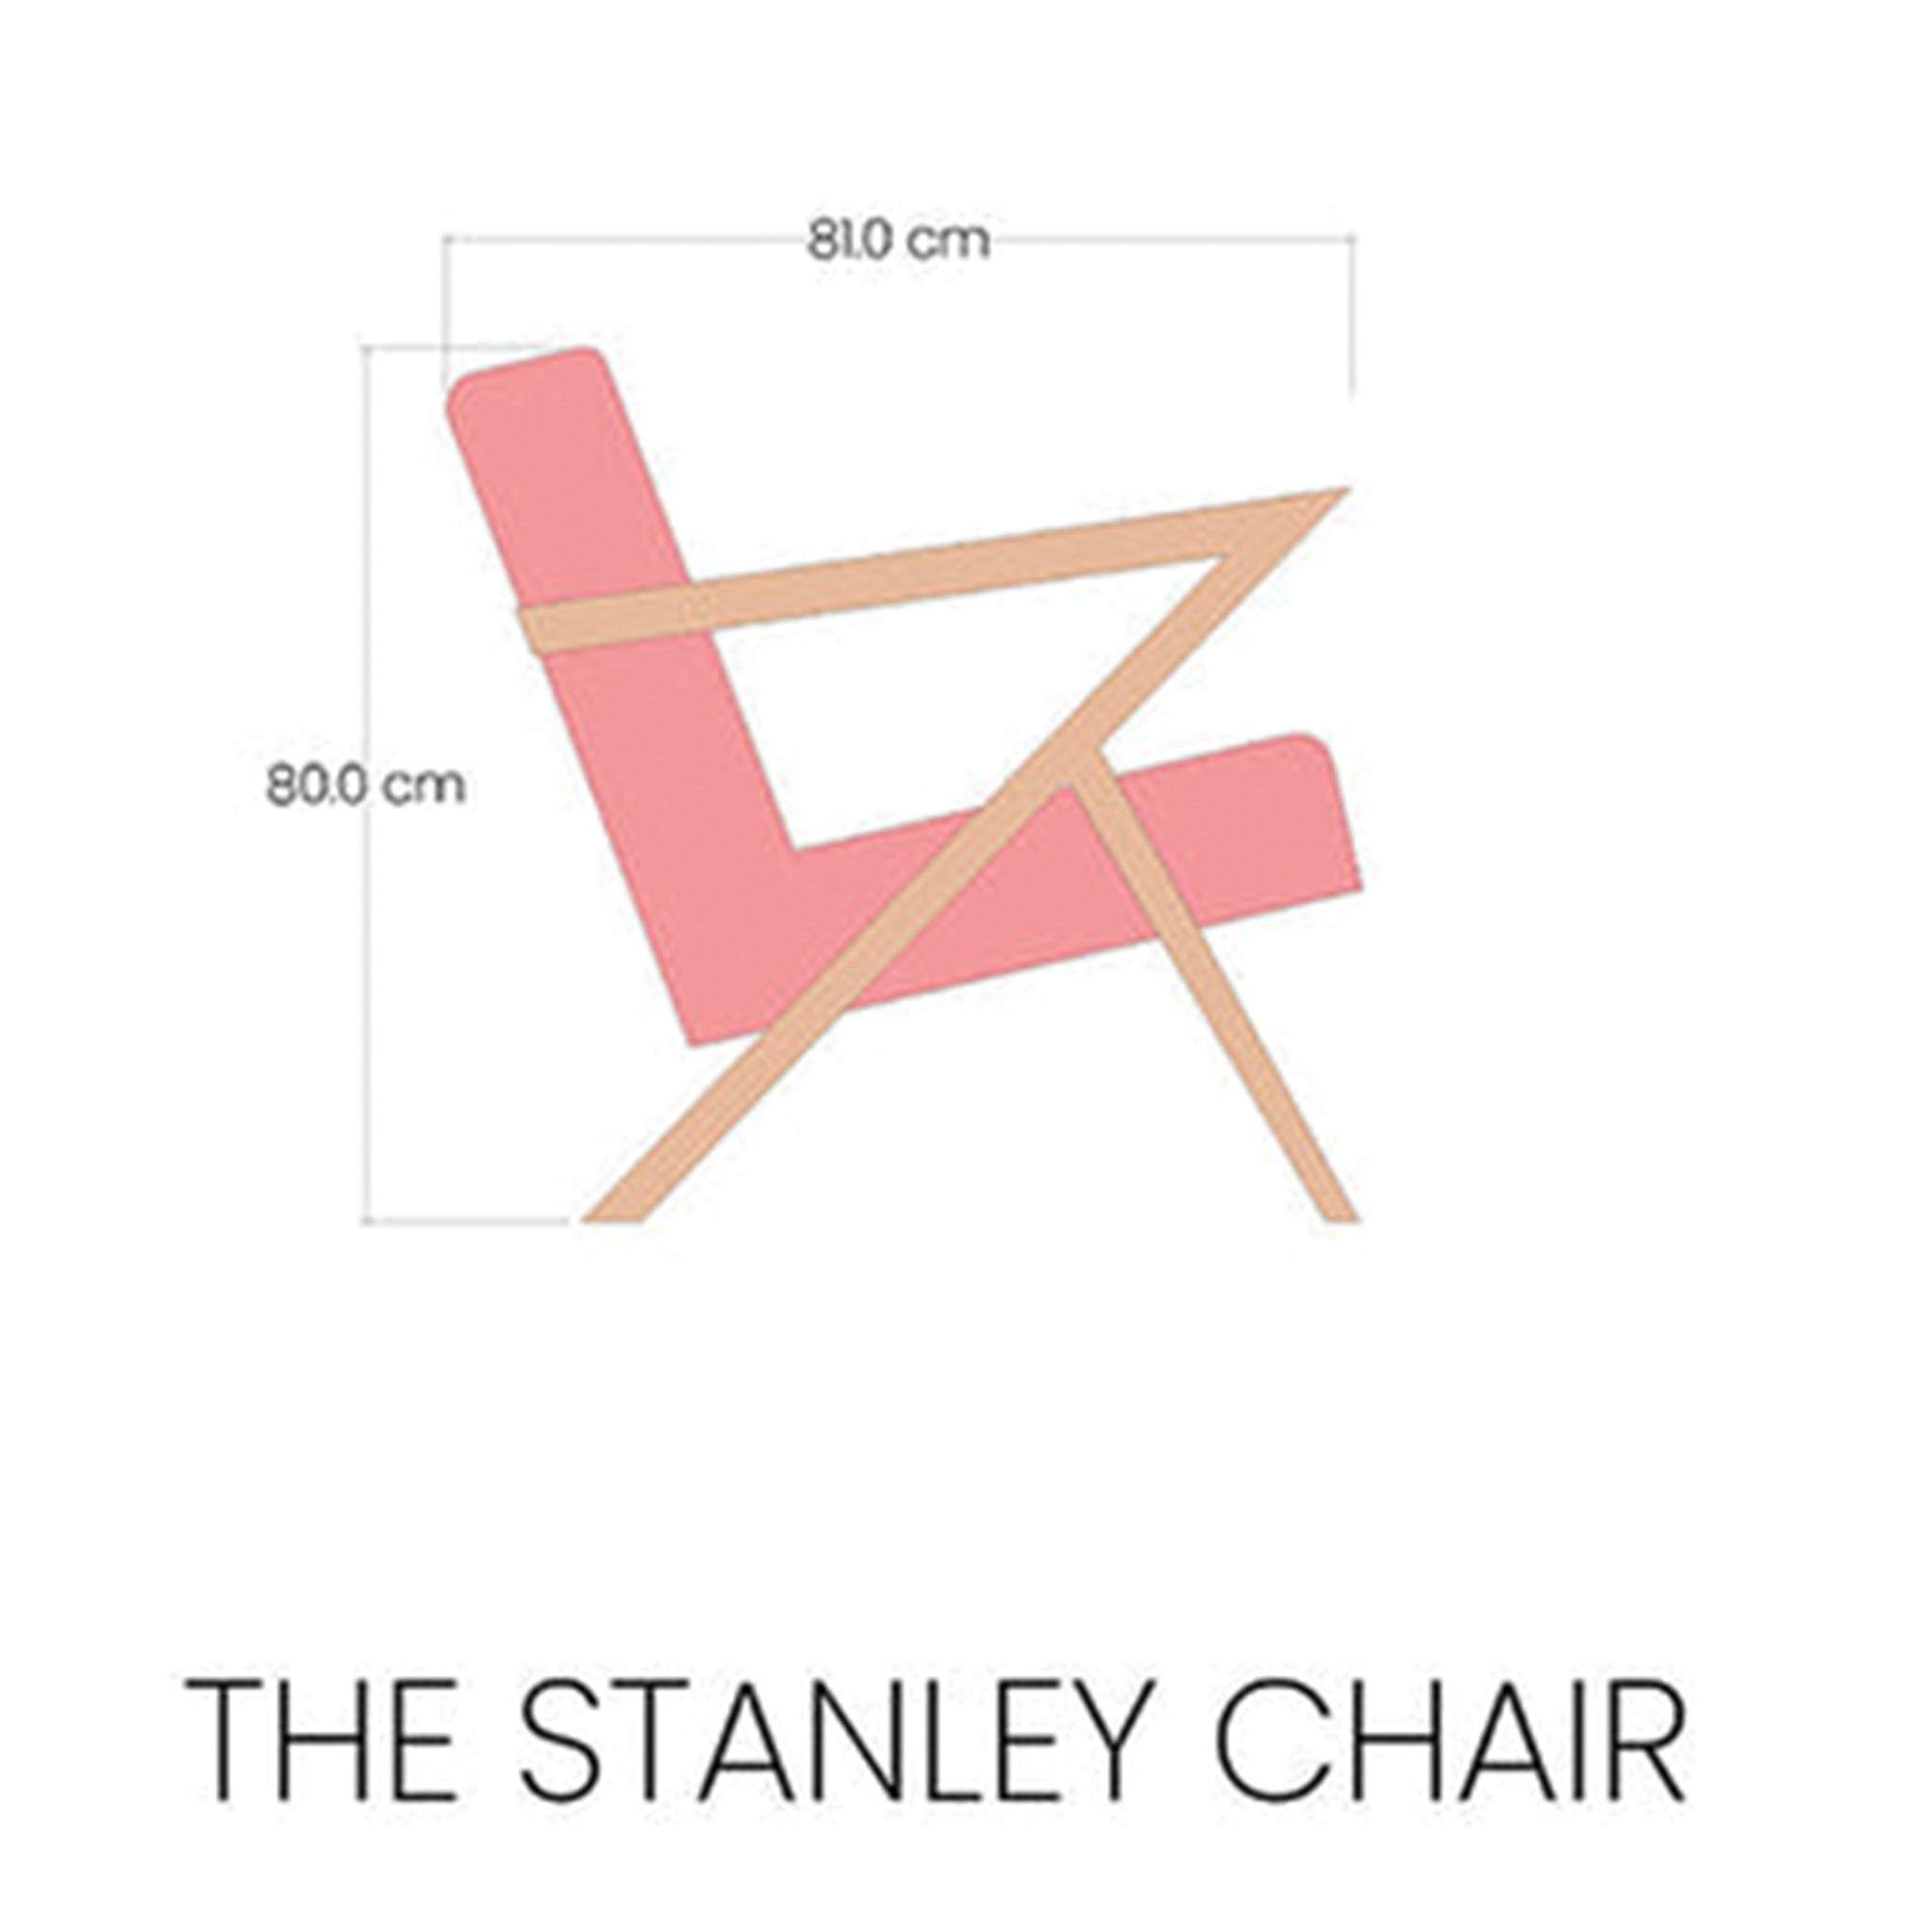 Retro-inspired Stanley chair for a stylish living room